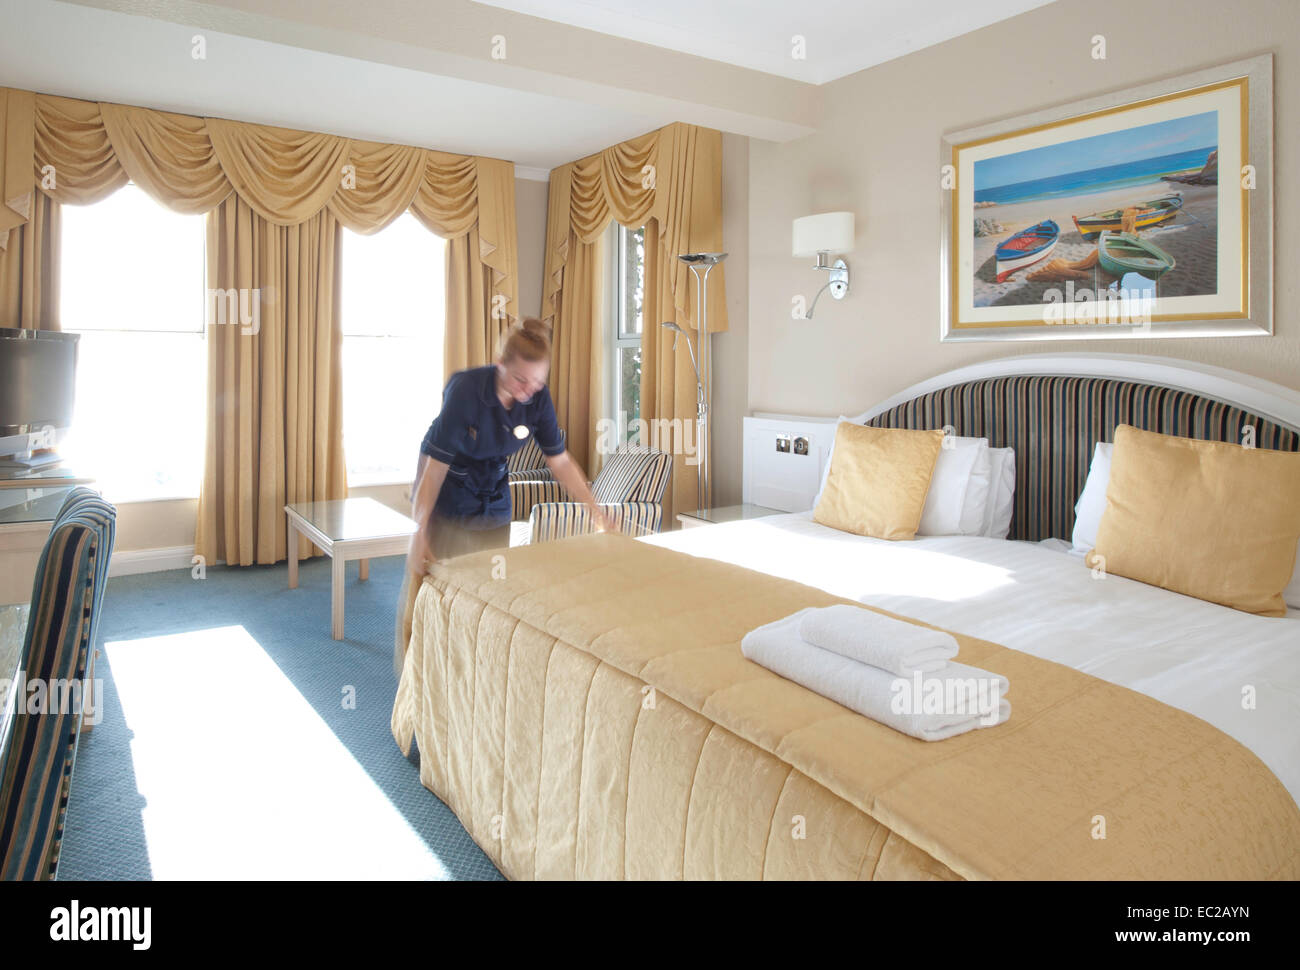 A housemaid making up a bed in a hotel Stock Photo